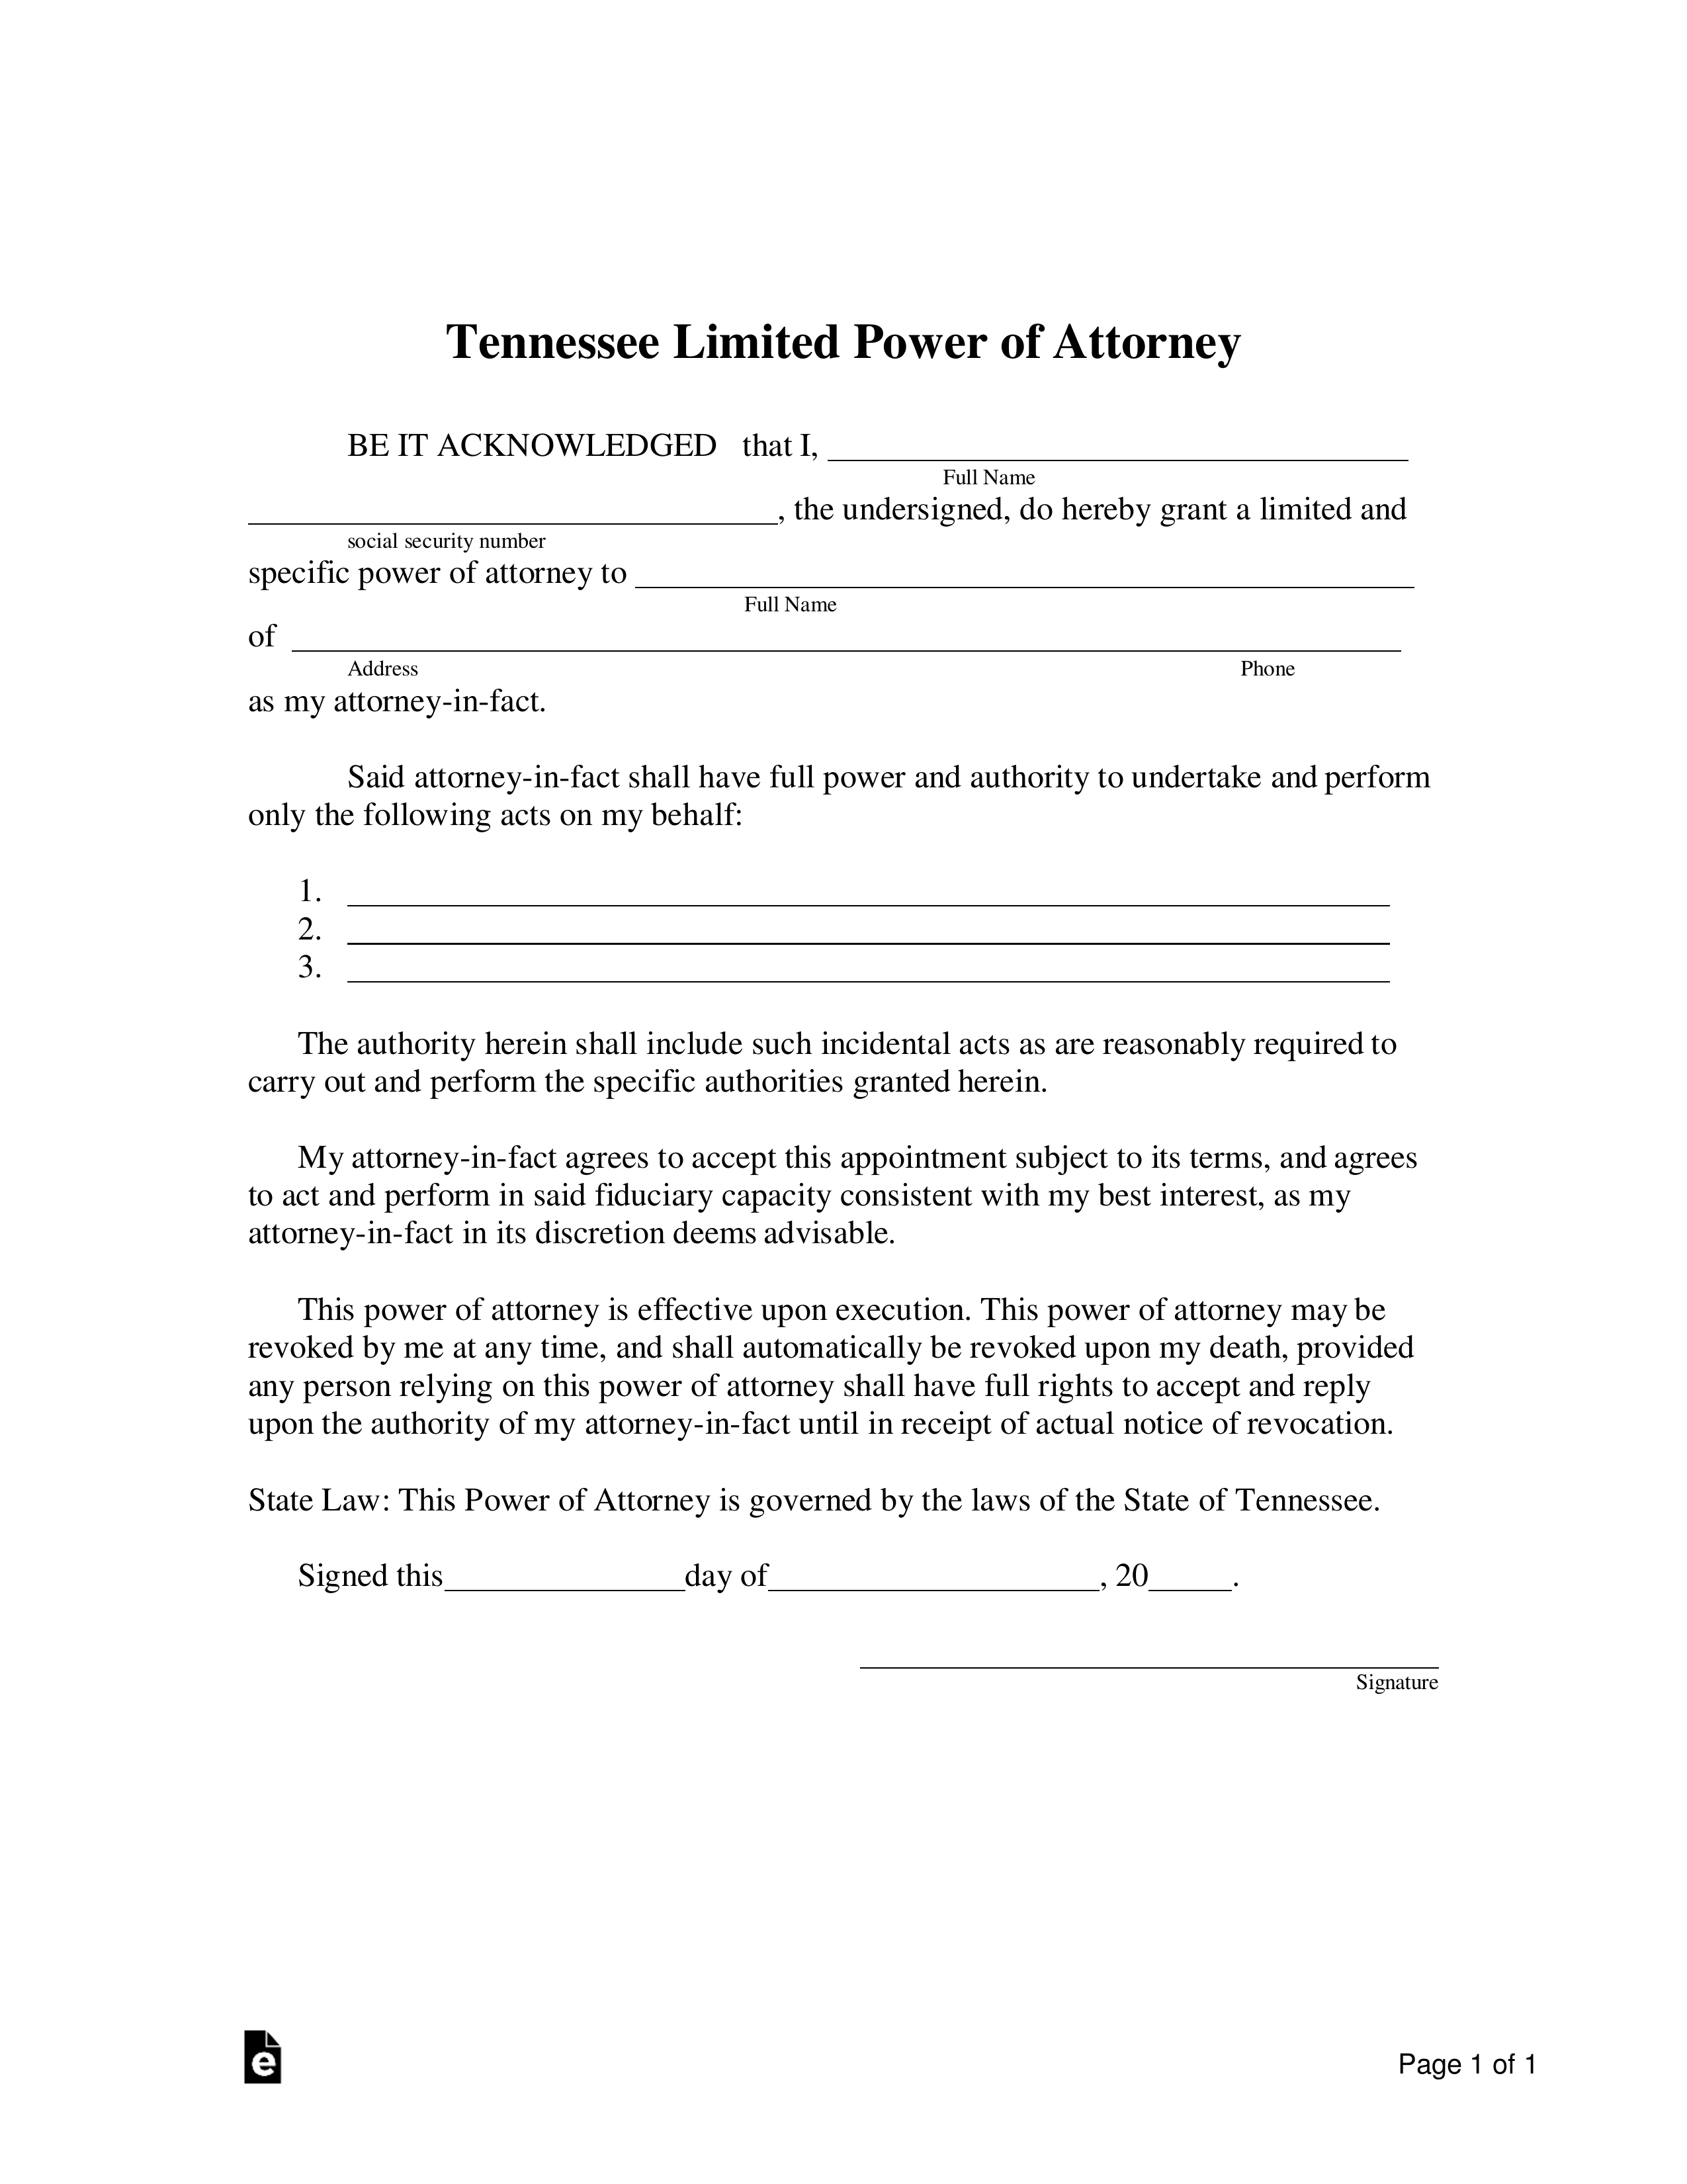 free-tennessee-limited-power-of-attorney-form-pdf-word-eforms